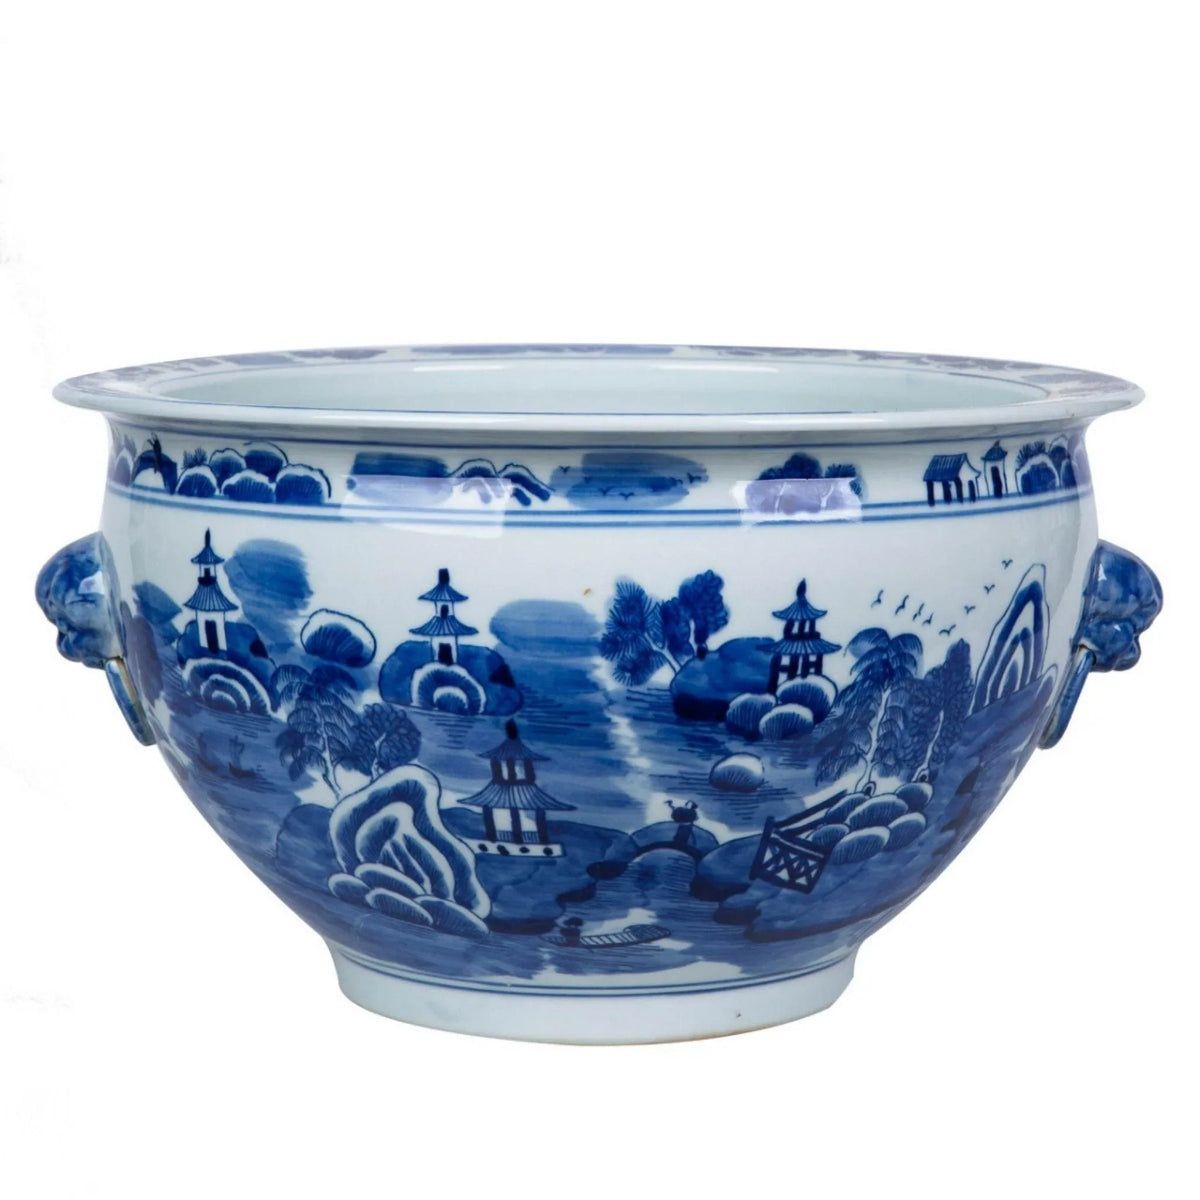 Blue and White Mountain Pagoda Porcelain Planter with Lion Head Handle | The Well Appointed House, LLC